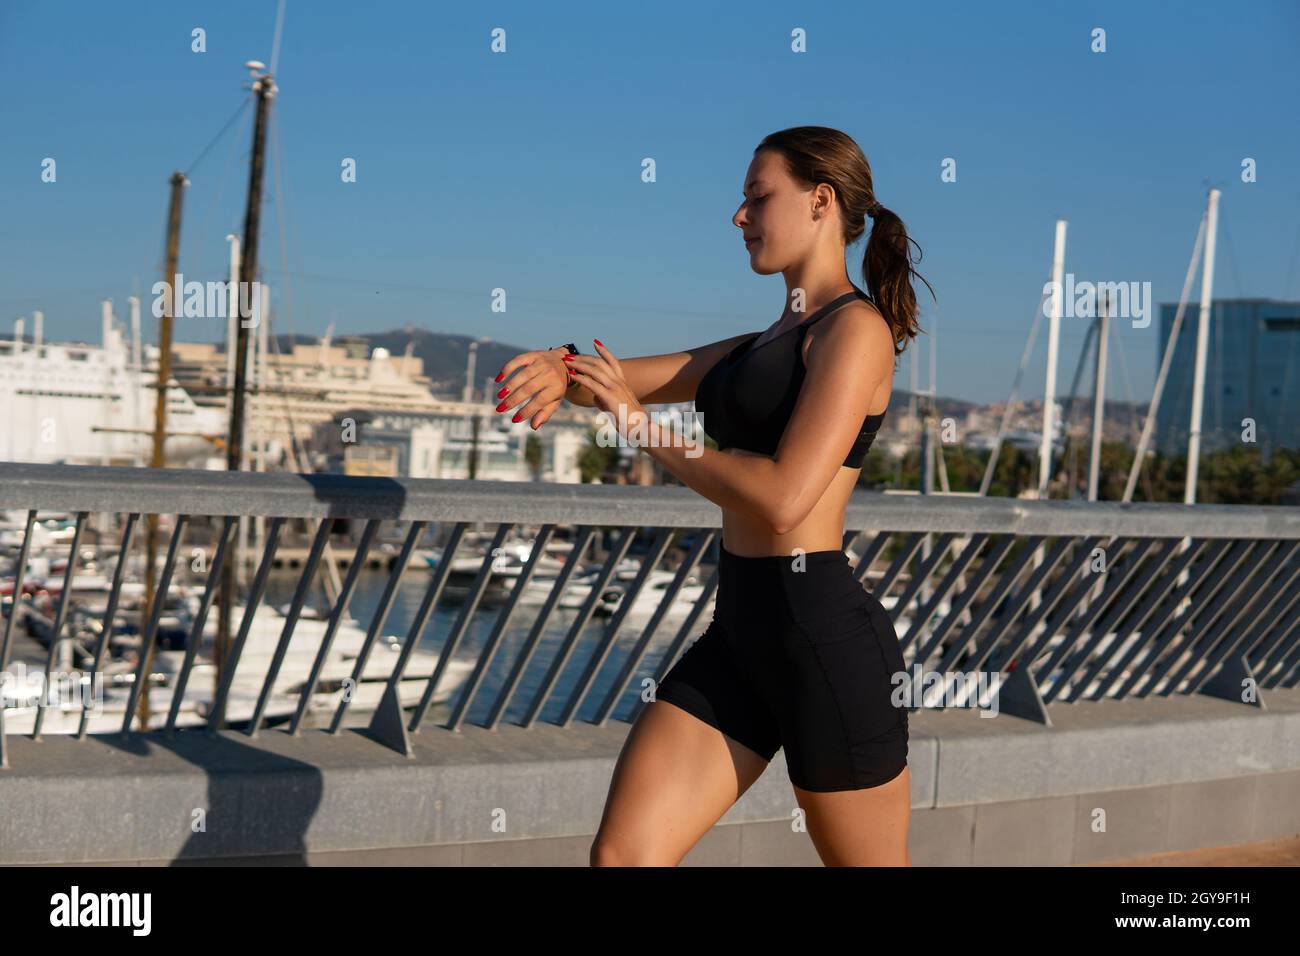 Italy, Milan, Portrait of woman in sports bra and headphones in city stock  photo